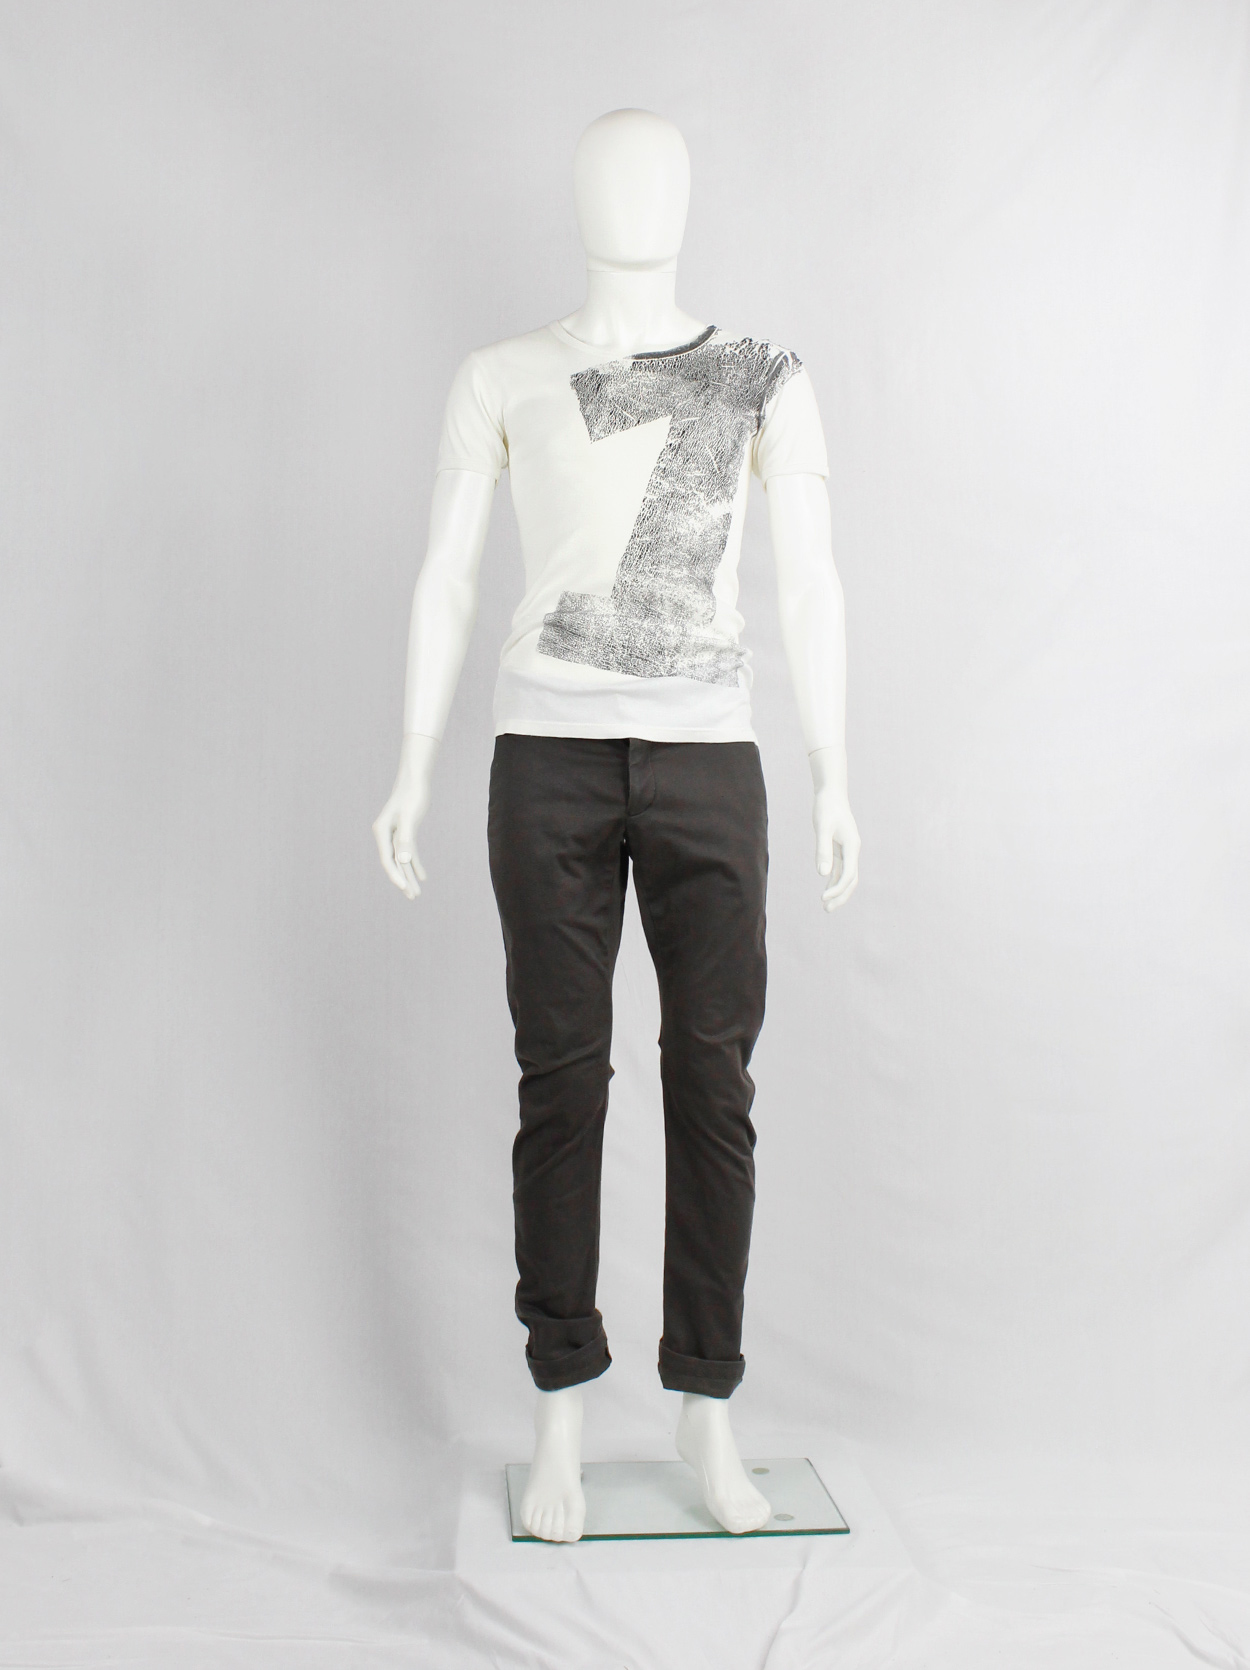 Maison Martin Margiela artisanal white t-shirt with number 1 print spring 2003 - V A N II T A